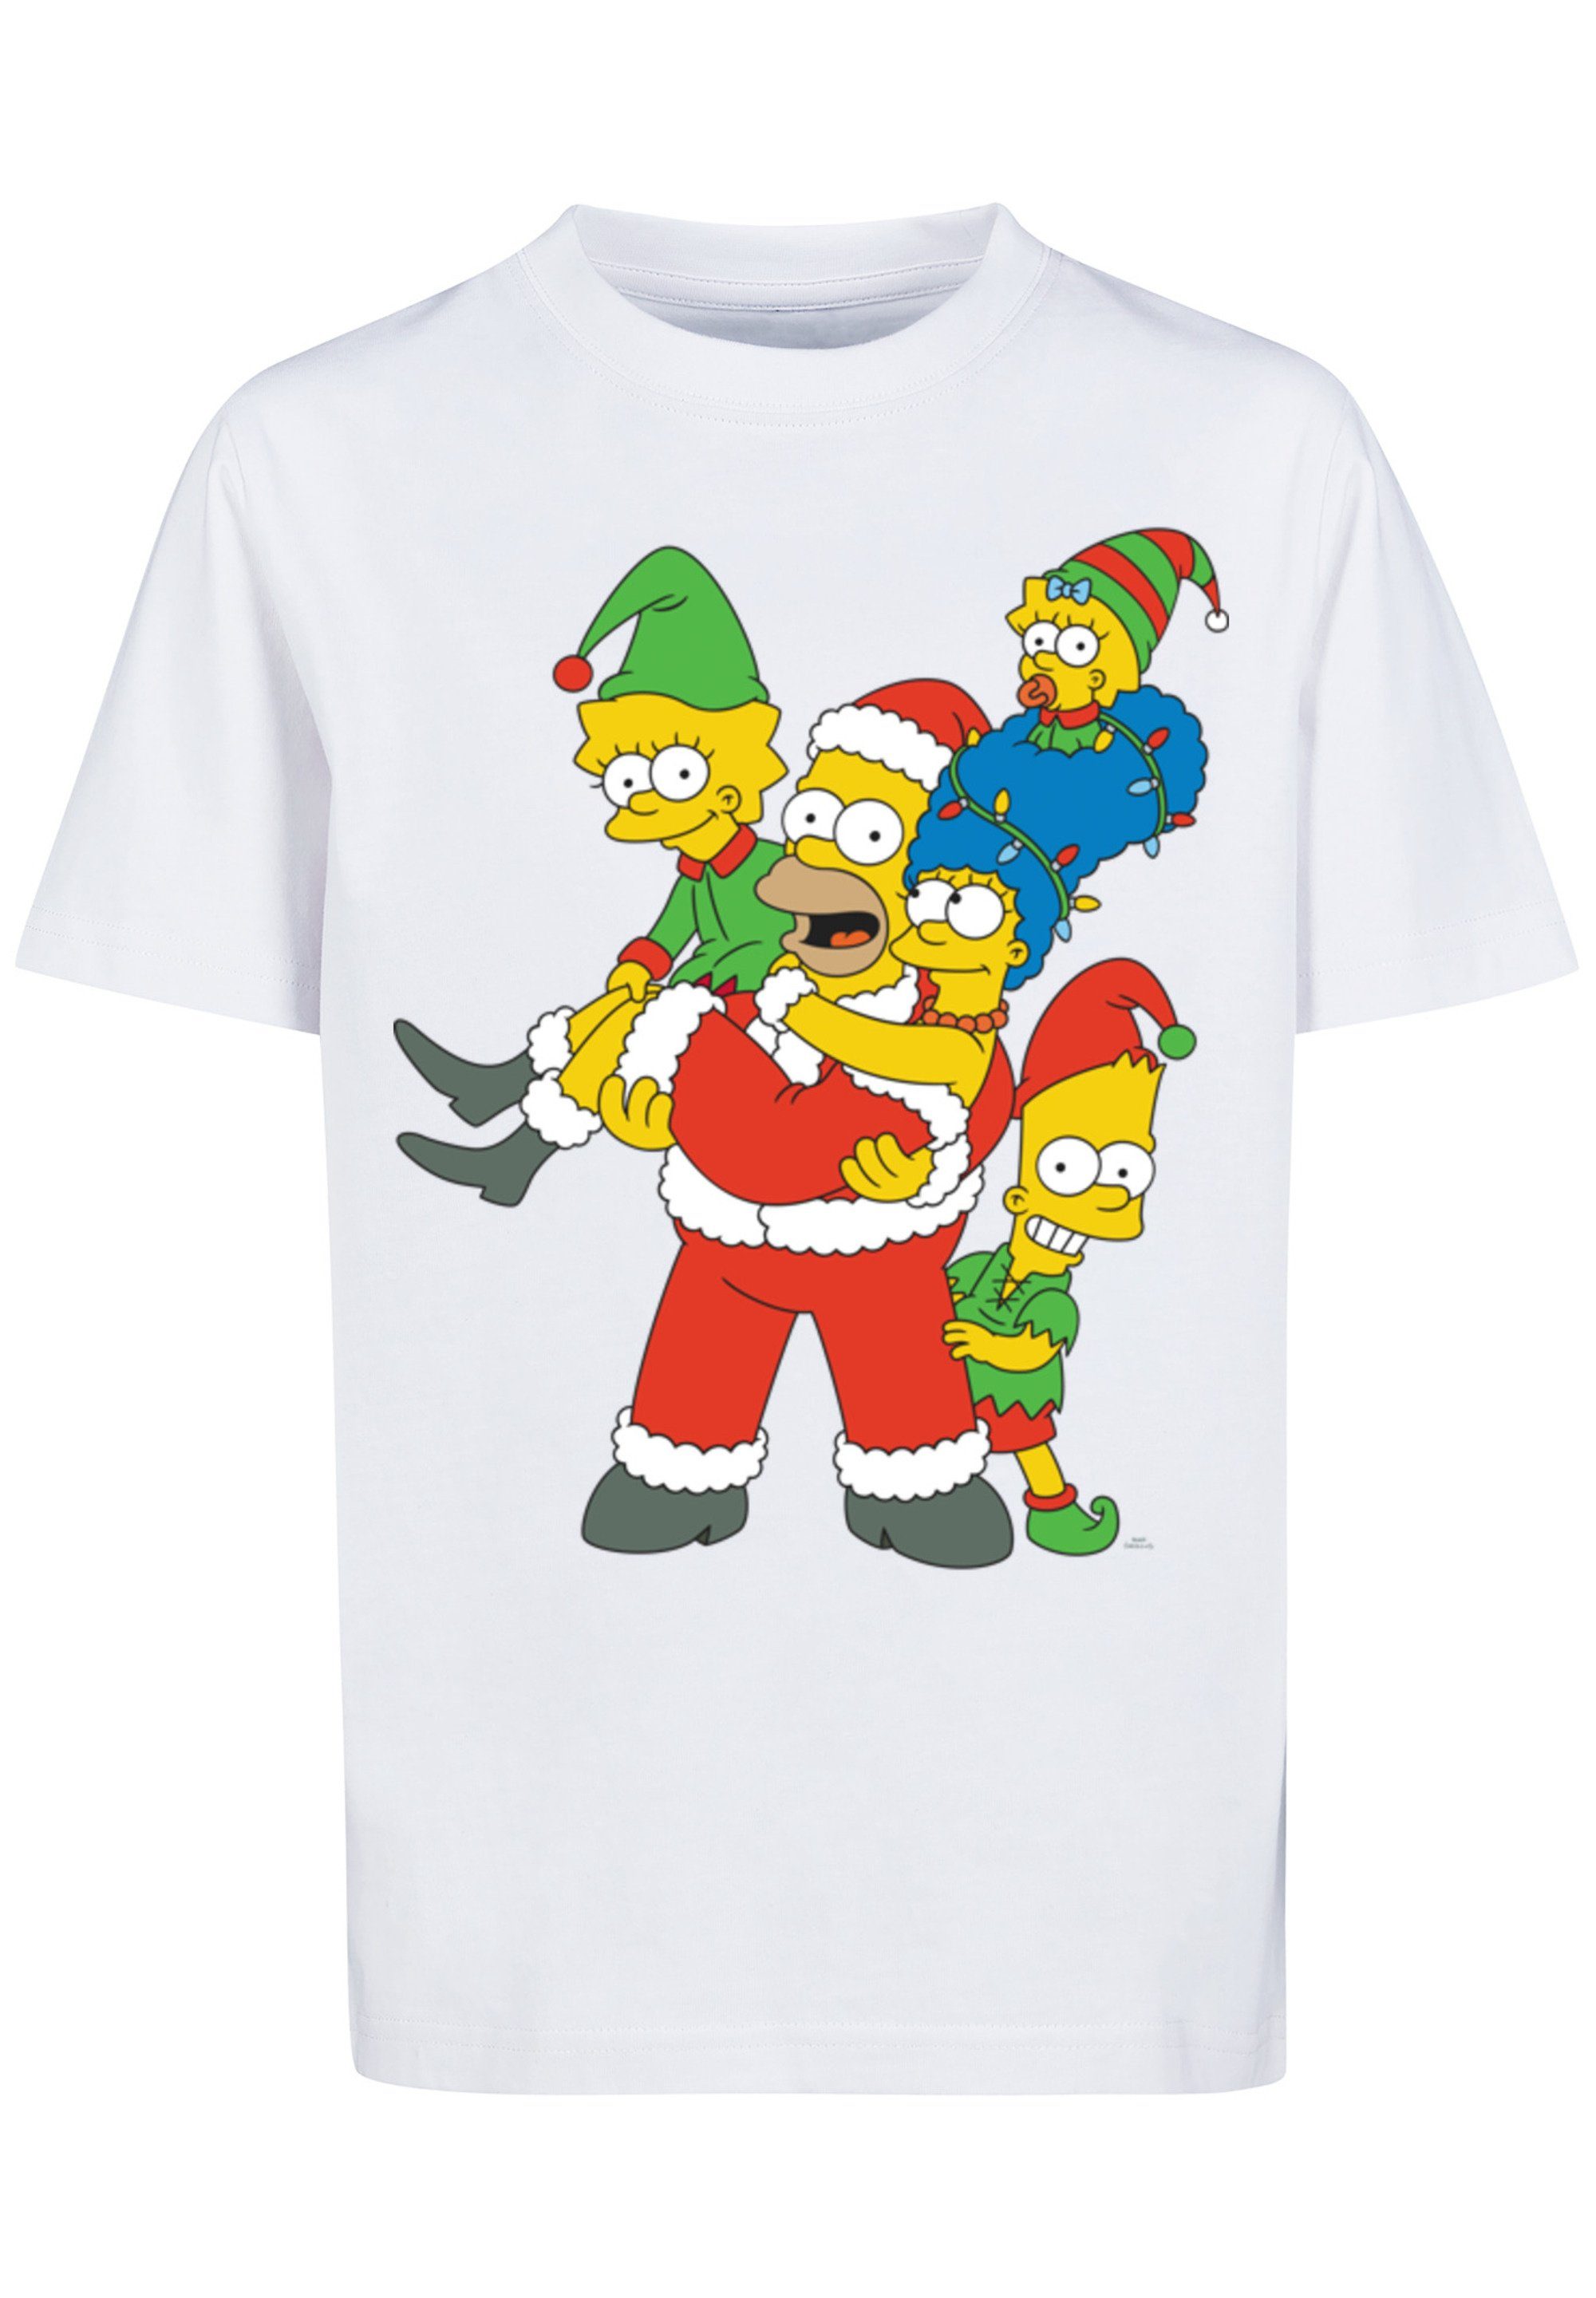 F4NT4STIC T-Shirt The Simpsons Weihnachten weiß Christmas Print Family